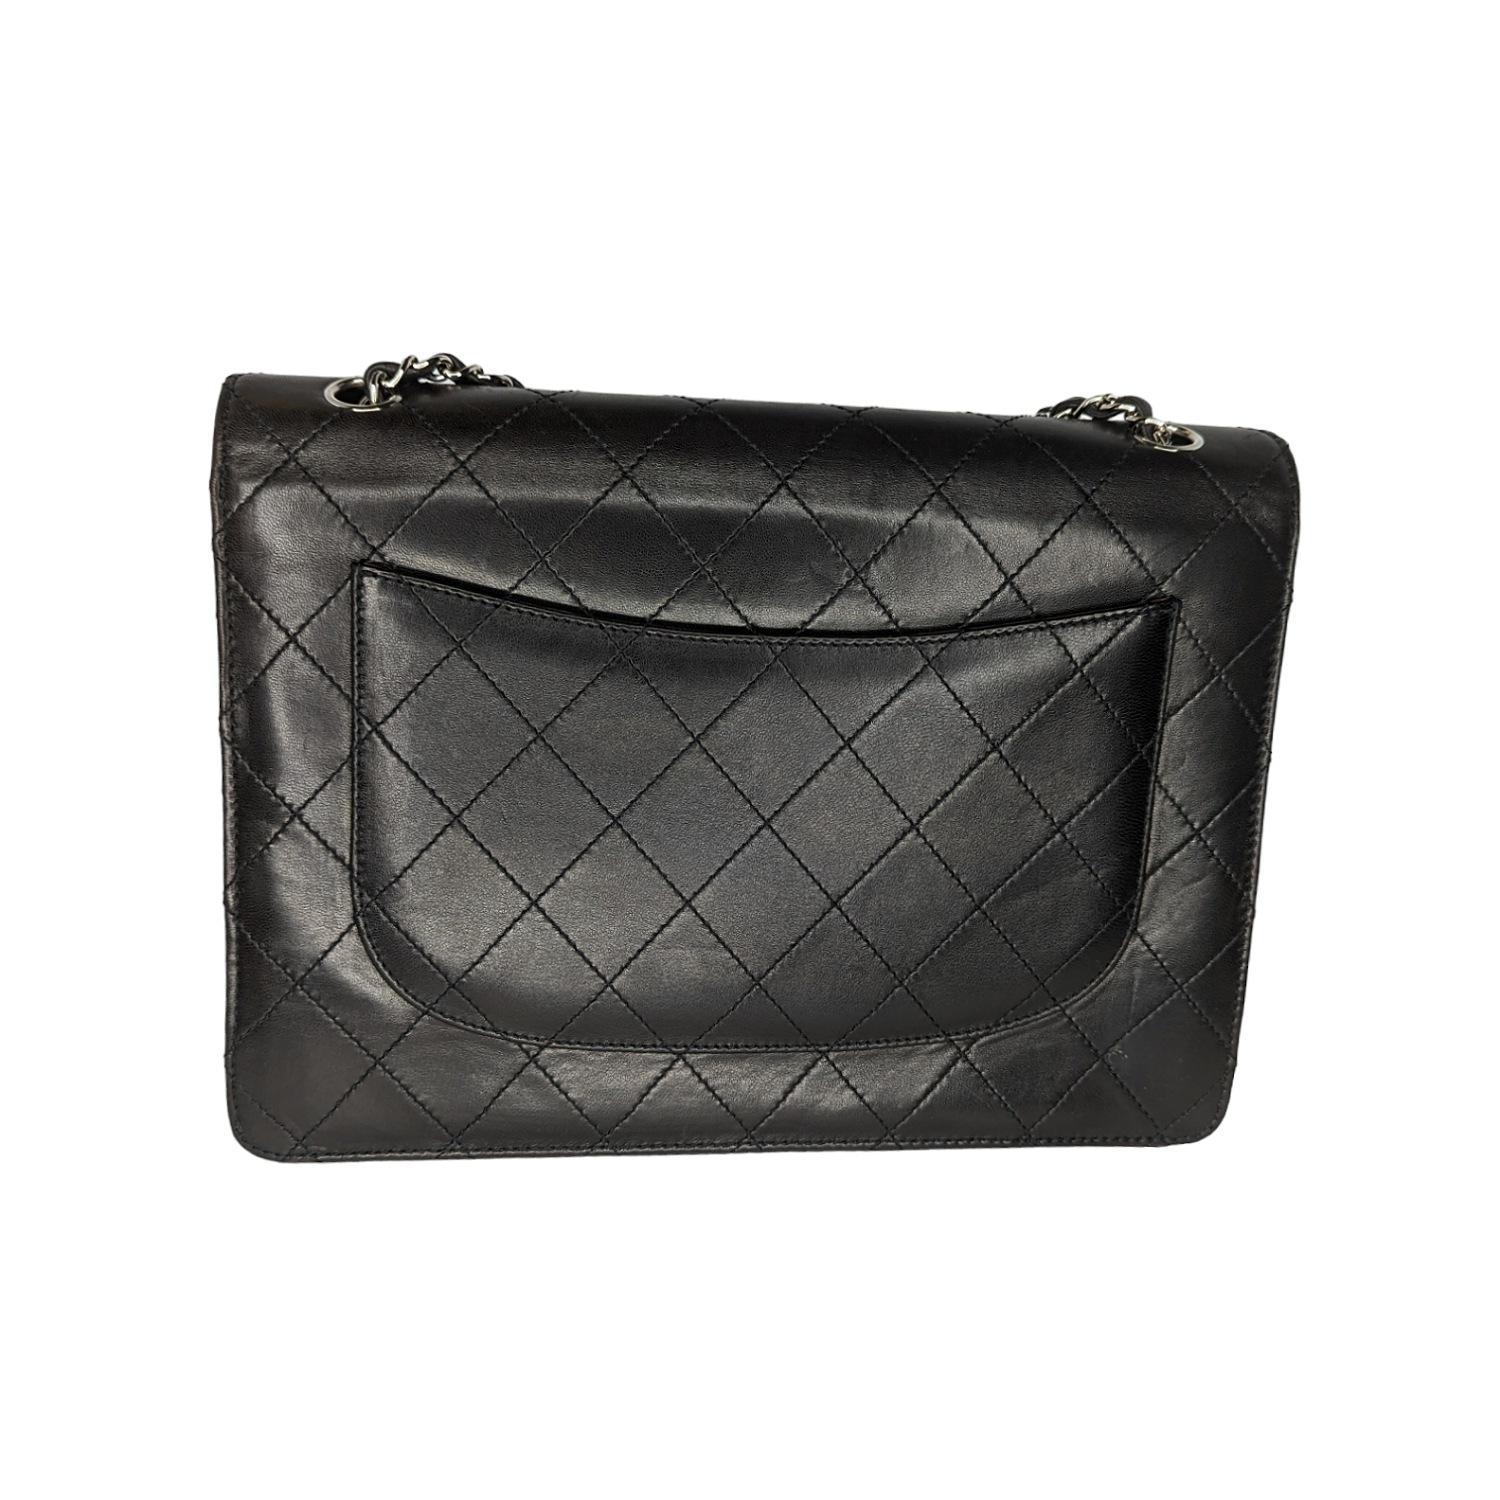 Chanel Vintage Square Classic Single Flap Bag Lambskin In Good Condition For Sale In Scottsdale, AZ